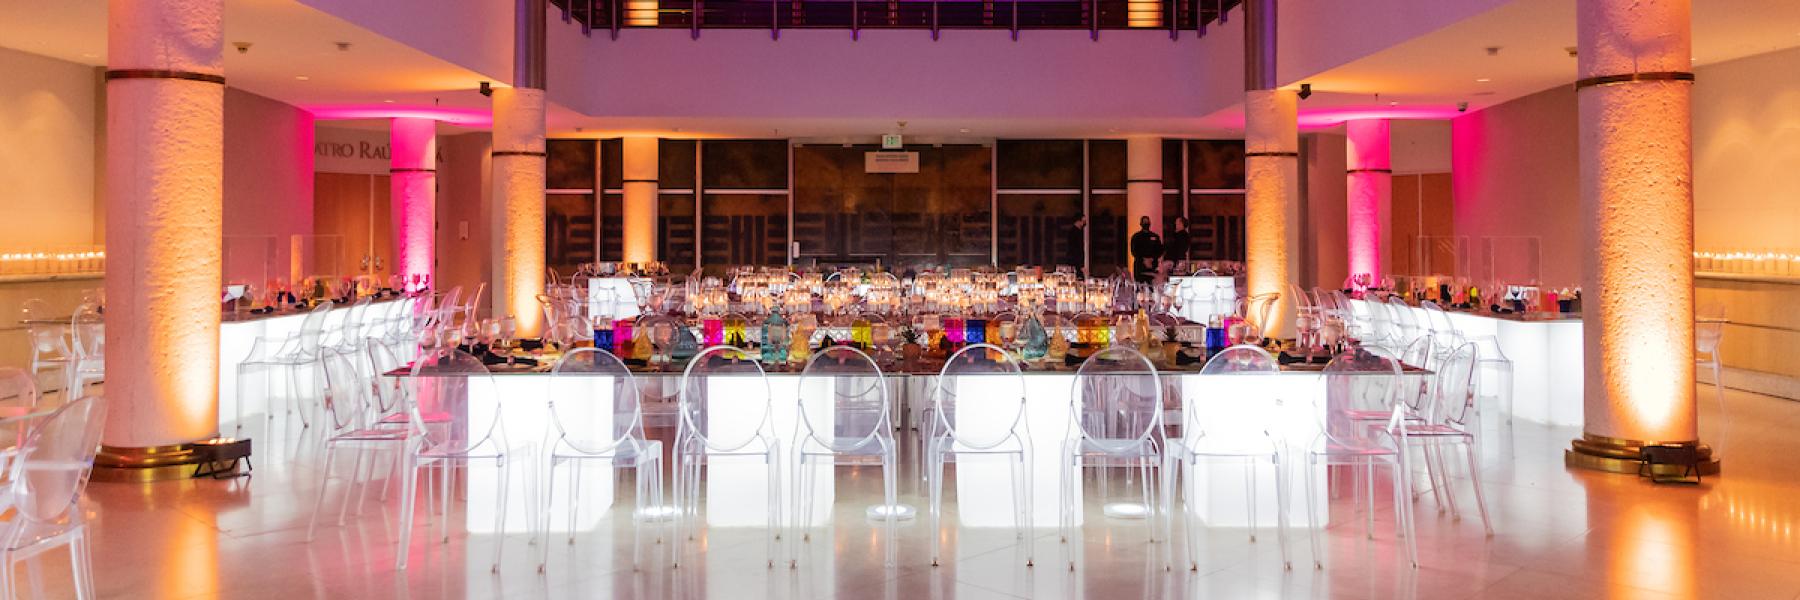 View of a table set up for a corporate event at the Museo de Arte de Puerto Rico in San Juan.